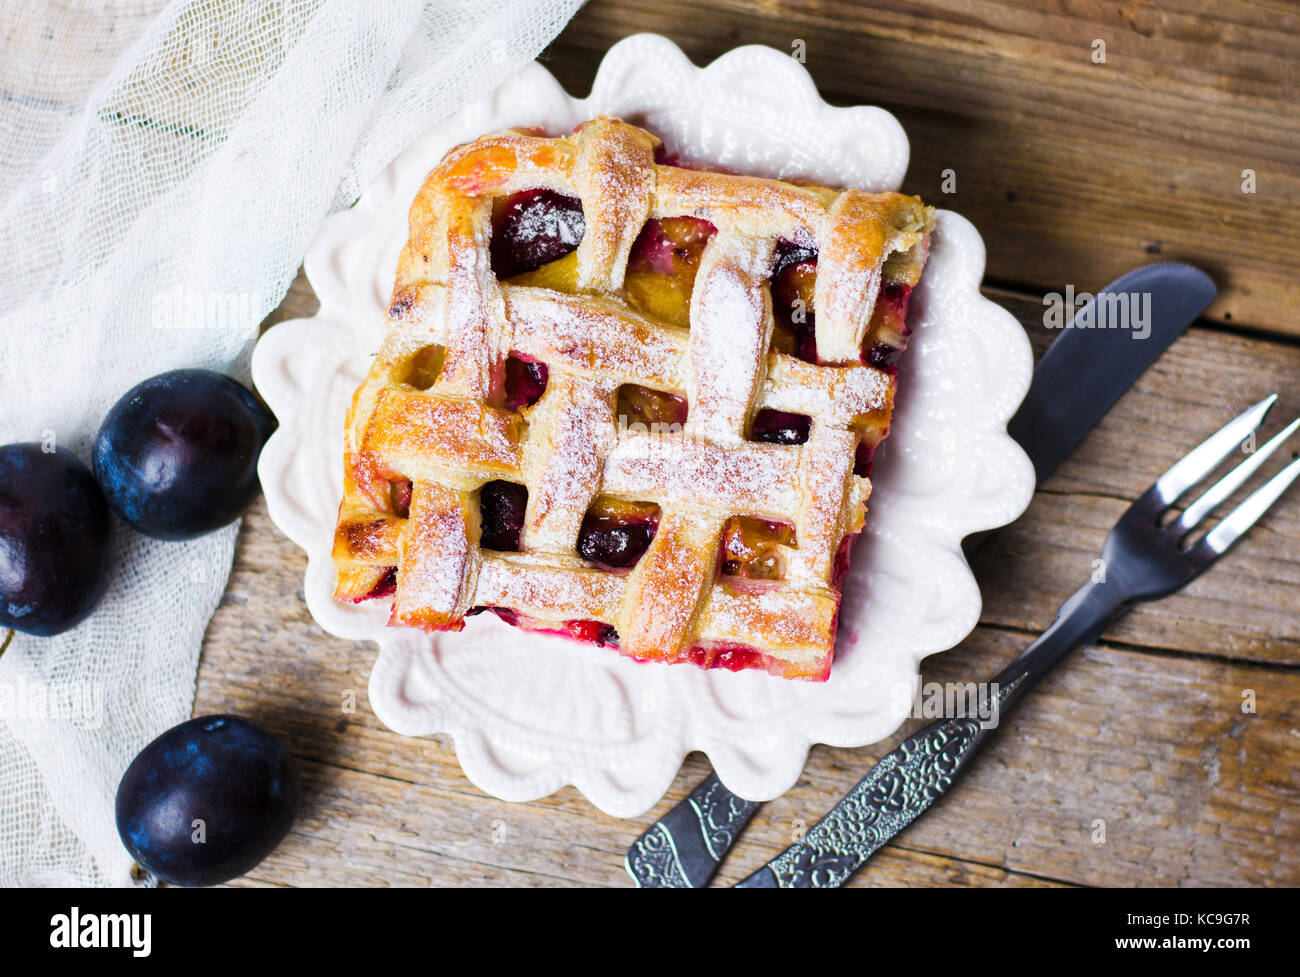 Sweet baked fruit pie with sugar on a tray Stock Photo